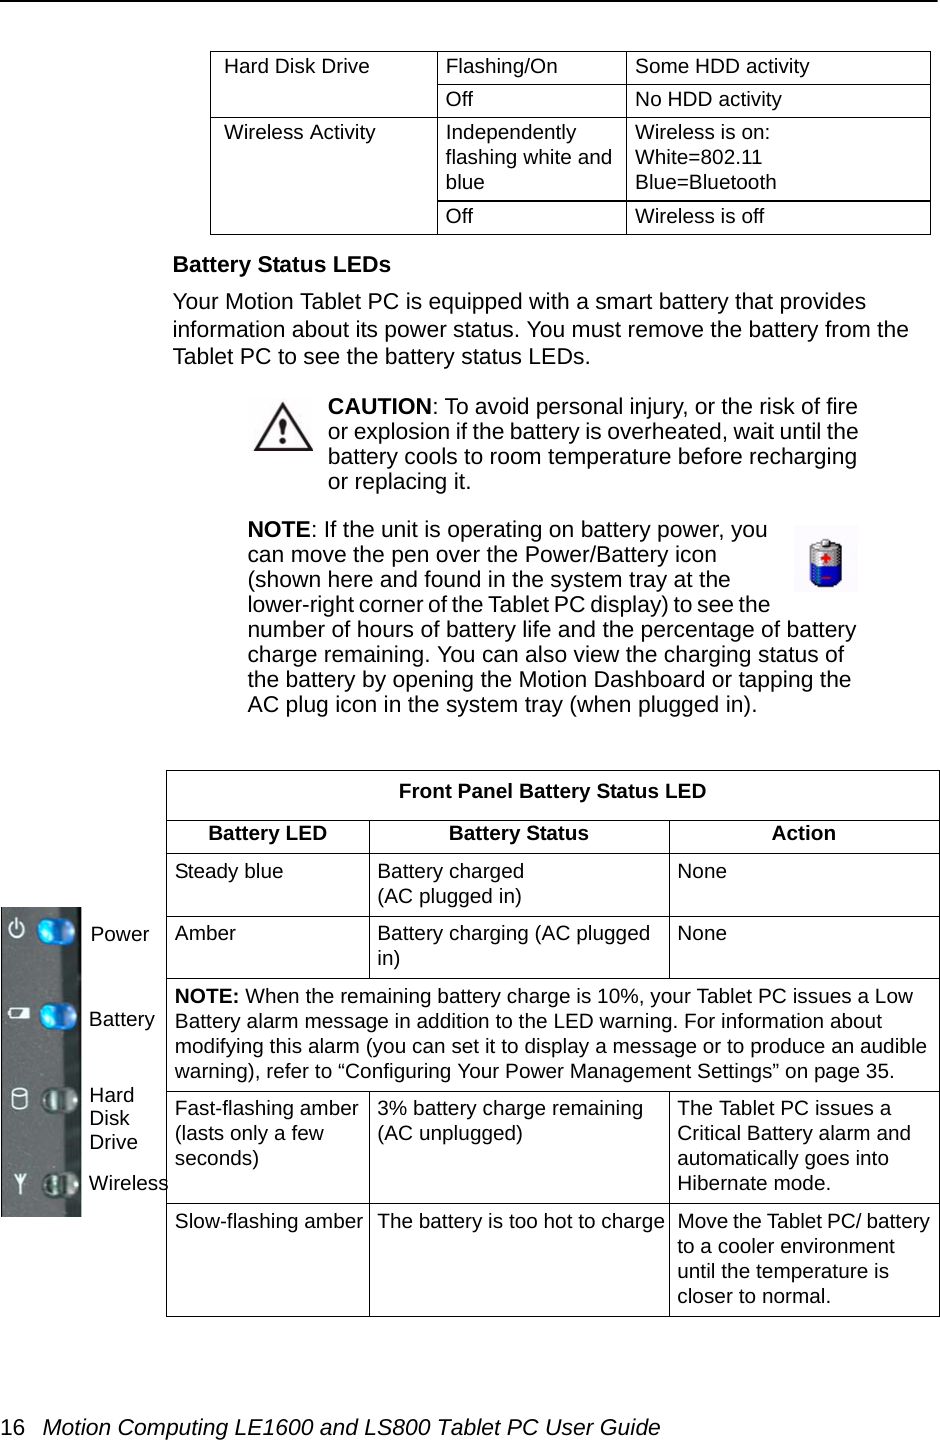 16 Motion Computing LE1600 and LS800 Tablet PC User GuideBattery Status LEDsYour Motion Tablet PC is equipped with a smart battery that provides information about its power status. You must remove the battery from the Tablet PC to see the battery status LEDs.CAUTION: To avoid personal injury, or the risk of fire or explosion if the battery is overheated, wait until the battery cools to room temperature before recharging or replacing it.NOTE: If the unit is operating on battery power, you can move the pen over the Power/Battery icon (shown here and found in the system tray at the lower-right corner of the Tablet PC display) to see the number of hours of battery life and the percentage of battery charge remaining. You can also view the charging status of the battery by opening the Motion Dashboard or tapping the AC plug icon in the system tray (when plugged in). Hard Disk Drive Flashing/On Some HDD activityOff No HDD activity Wireless Activity Independently flashing white and blueWireless is on:White=802.11Blue=BluetoothOff Wireless is offPowerBatteryHard DiskDriveWirelessFront Panel Battery Status LEDBattery LED Battery Status ActionSteady blue Battery charged(AC plugged in) NoneAmber Battery charging (AC plugged in) NoneNOTE: When the remaining battery charge is 10%, your Tablet PC issues a Low Battery alarm message in addition to the LED warning. For information about modifying this alarm (you can set it to display a message or to produce an audible warning), refer to “Configuring Your Power Management Settings” on page 35.Fast-flashing amber (lasts only a few seconds)3% battery charge remaining(AC unplugged) The Tablet PC issues a Critical Battery alarm and automatically goes into Hibernate mode. Slow-flashing amber The battery is too hot to charge Move the Tablet PC/ battery to a cooler environment until the temperature is closer to normal.